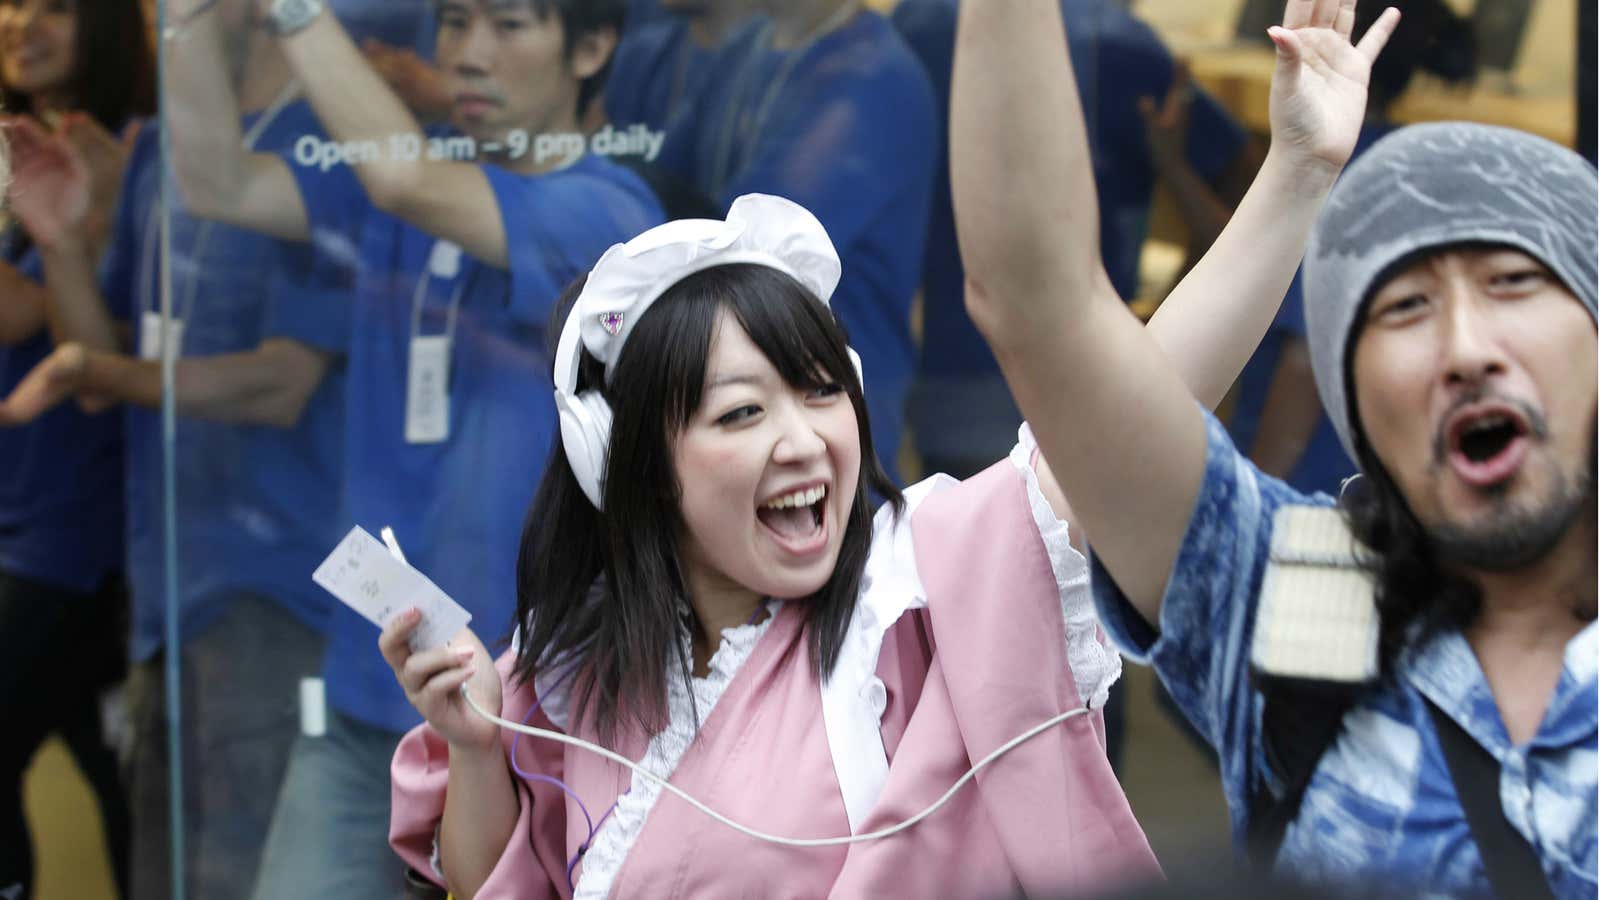 Customers celebrate the release of the iPhone 5 in Tokyo, Japan.